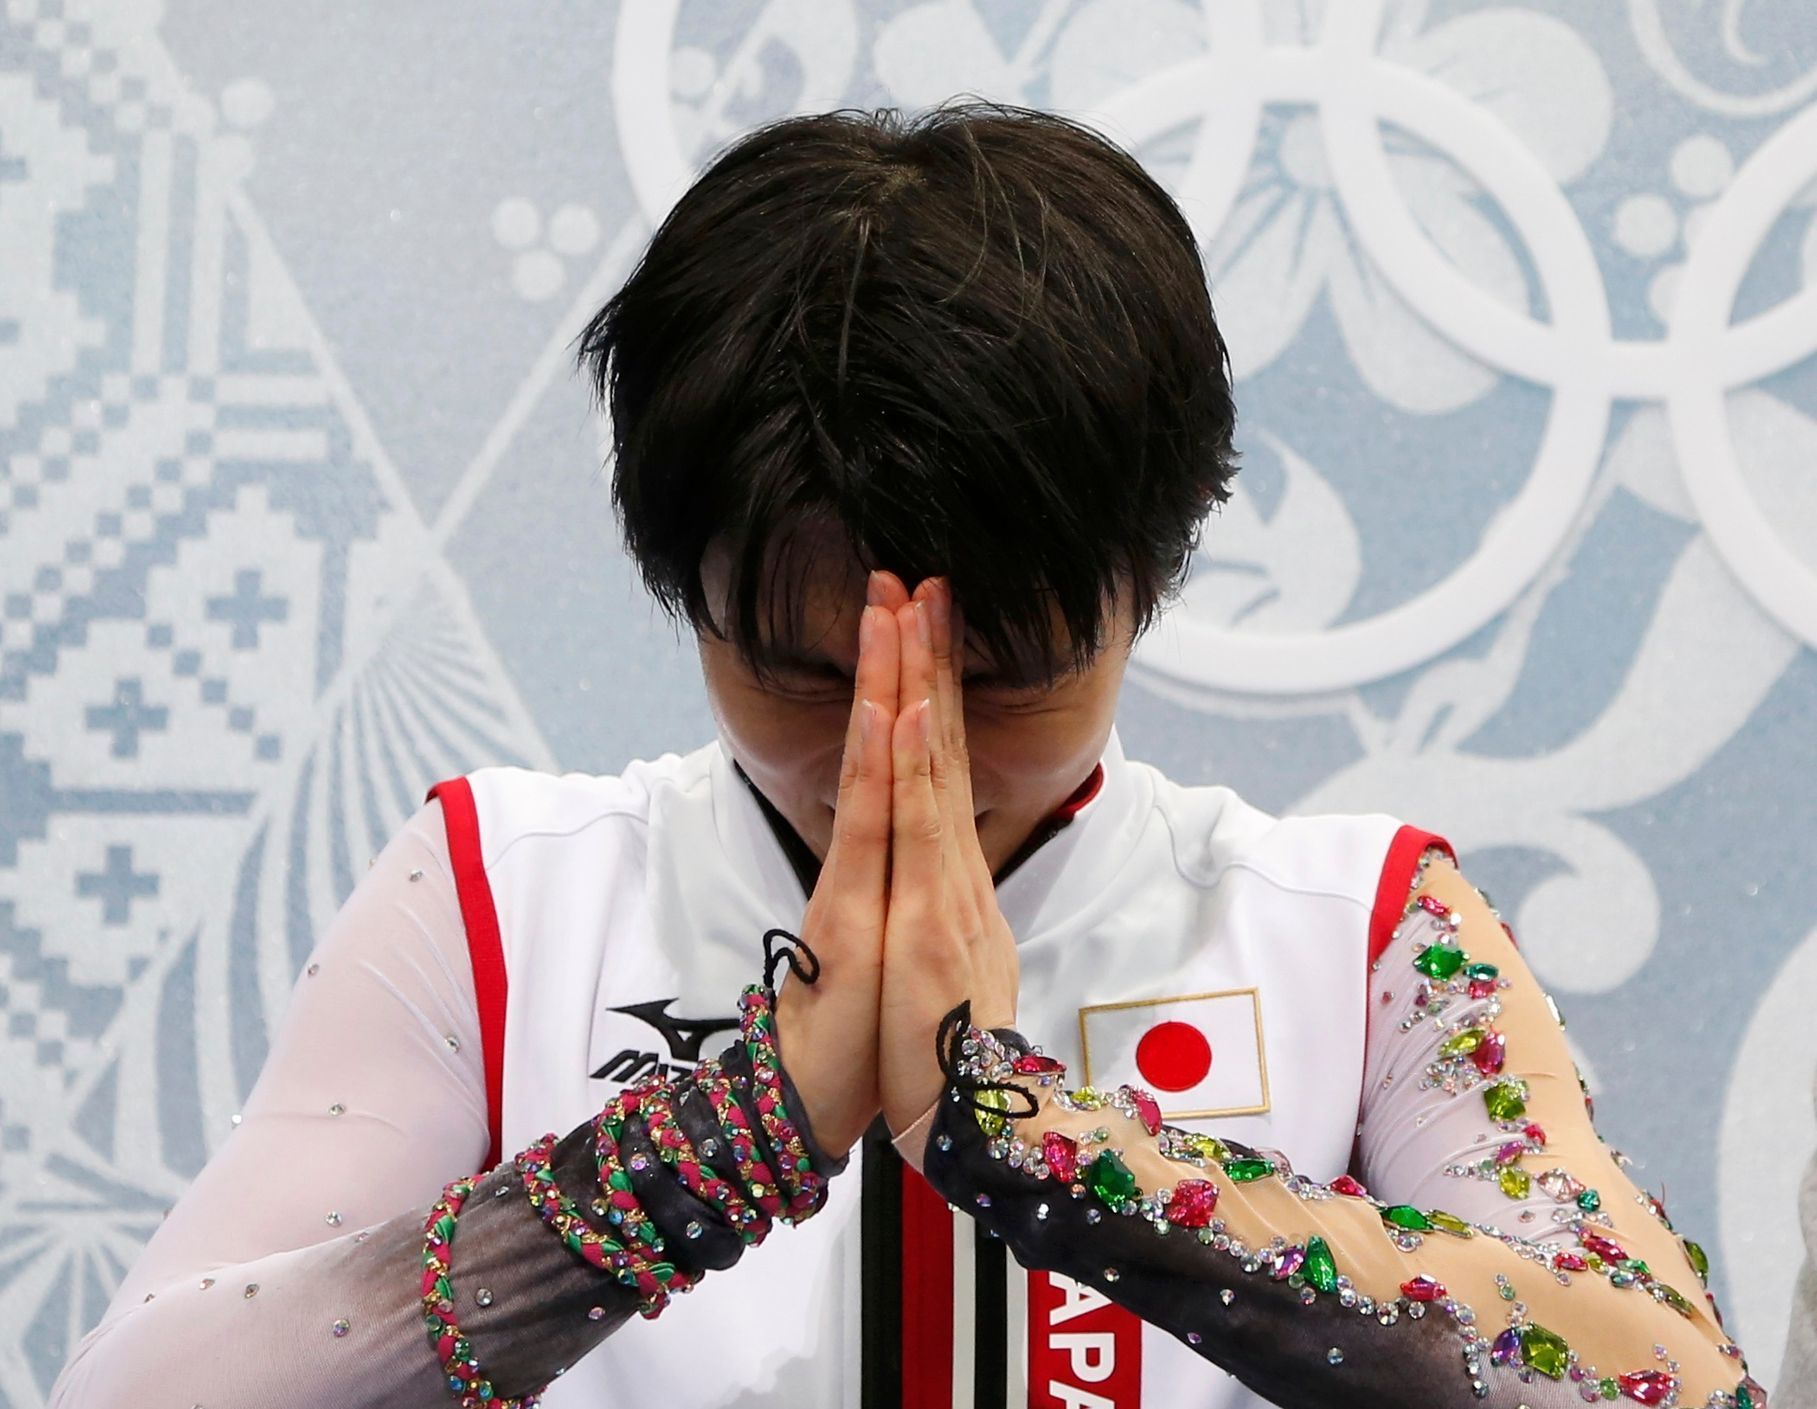 Japan's Yuzuru Hanyu  reacts in the &quot;kiss and cry&quot; area during the Figure Skating Men's Free Skating Program at the Sochi 2014 Winter Olympics